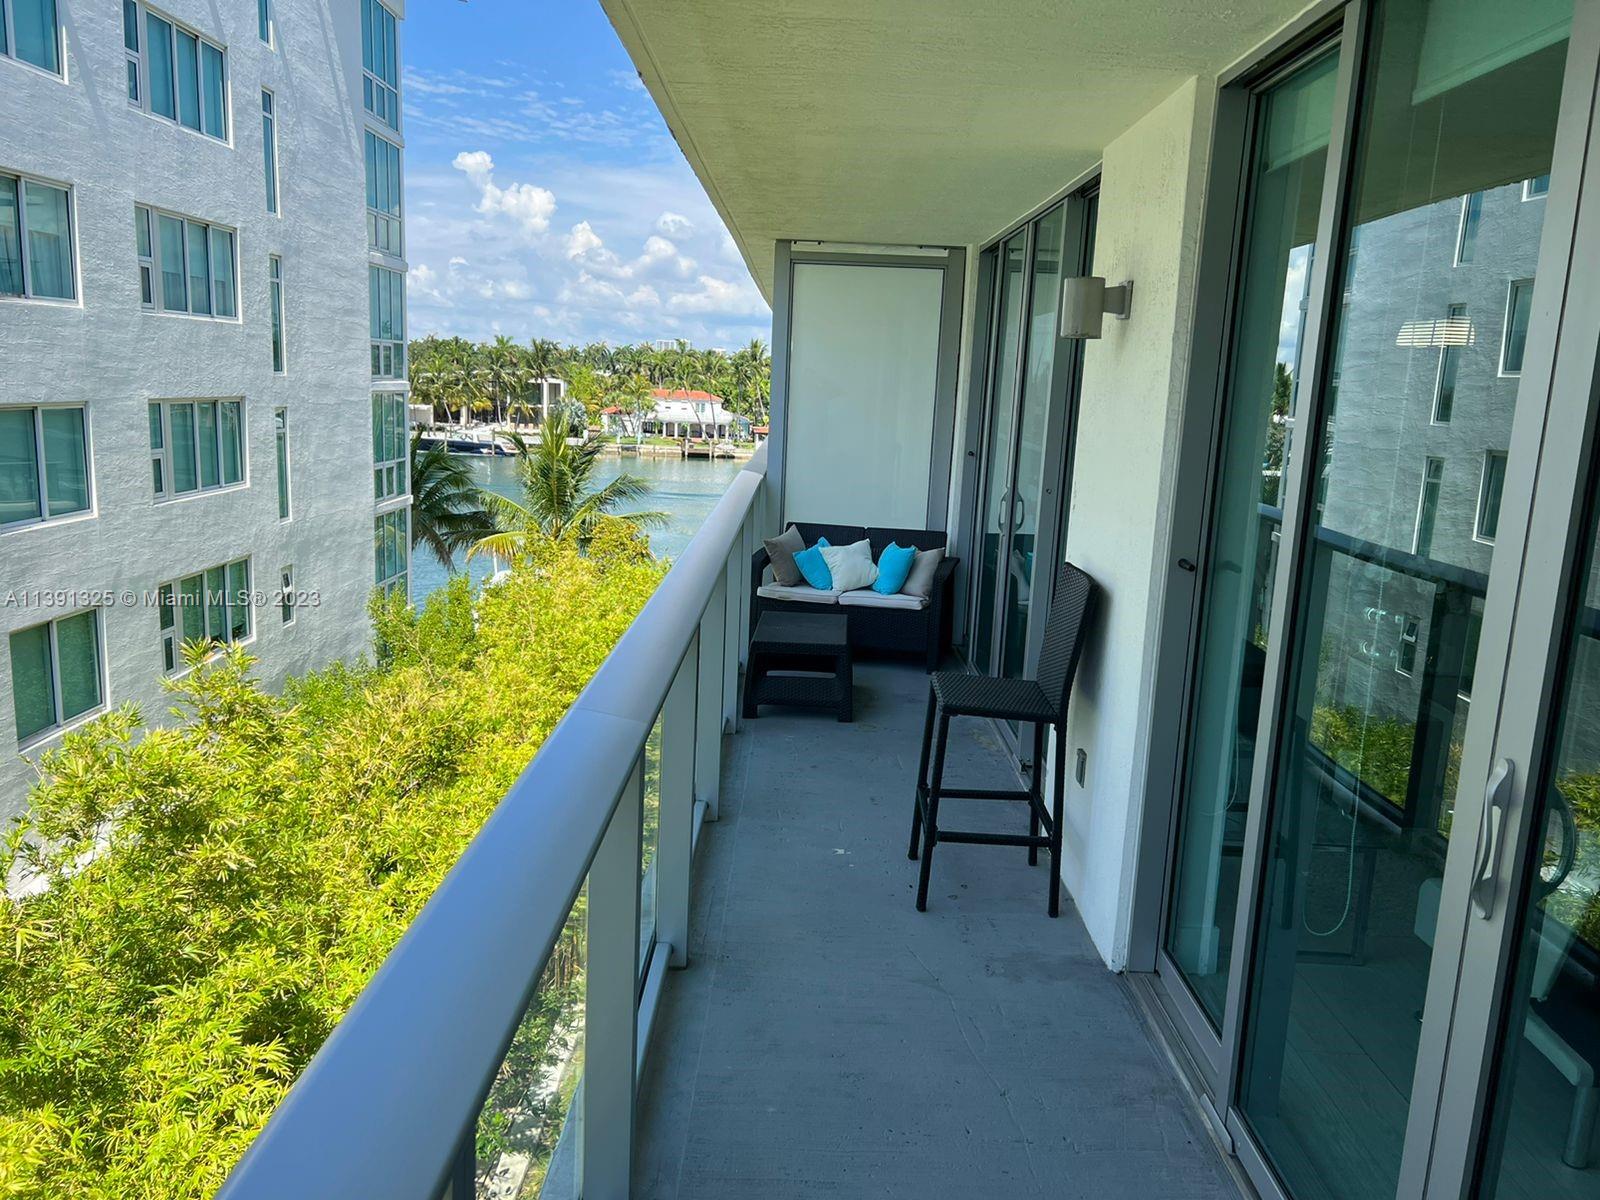 VACANT! Spectacular 1 bed t1-1 bath OPEN FLOOR PLAN LOFT STYLE- Bedroom OPENS into living room with ample walking closet. Huge balcony with partial bay views.